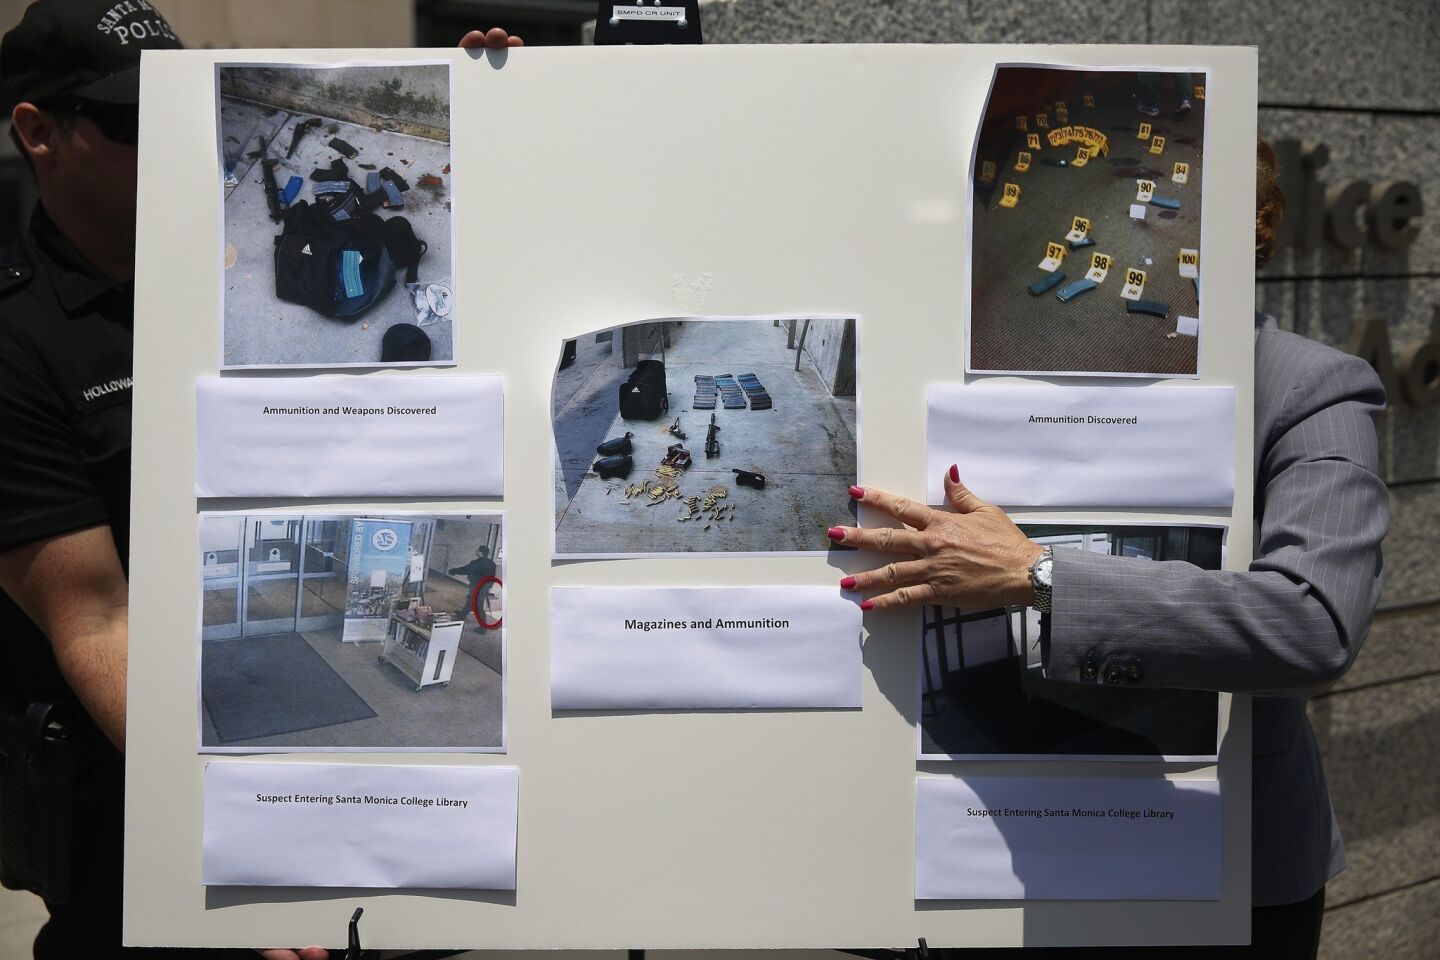 Surveillance and evidence photos were displayed in front of Santa Monica police headquarters.